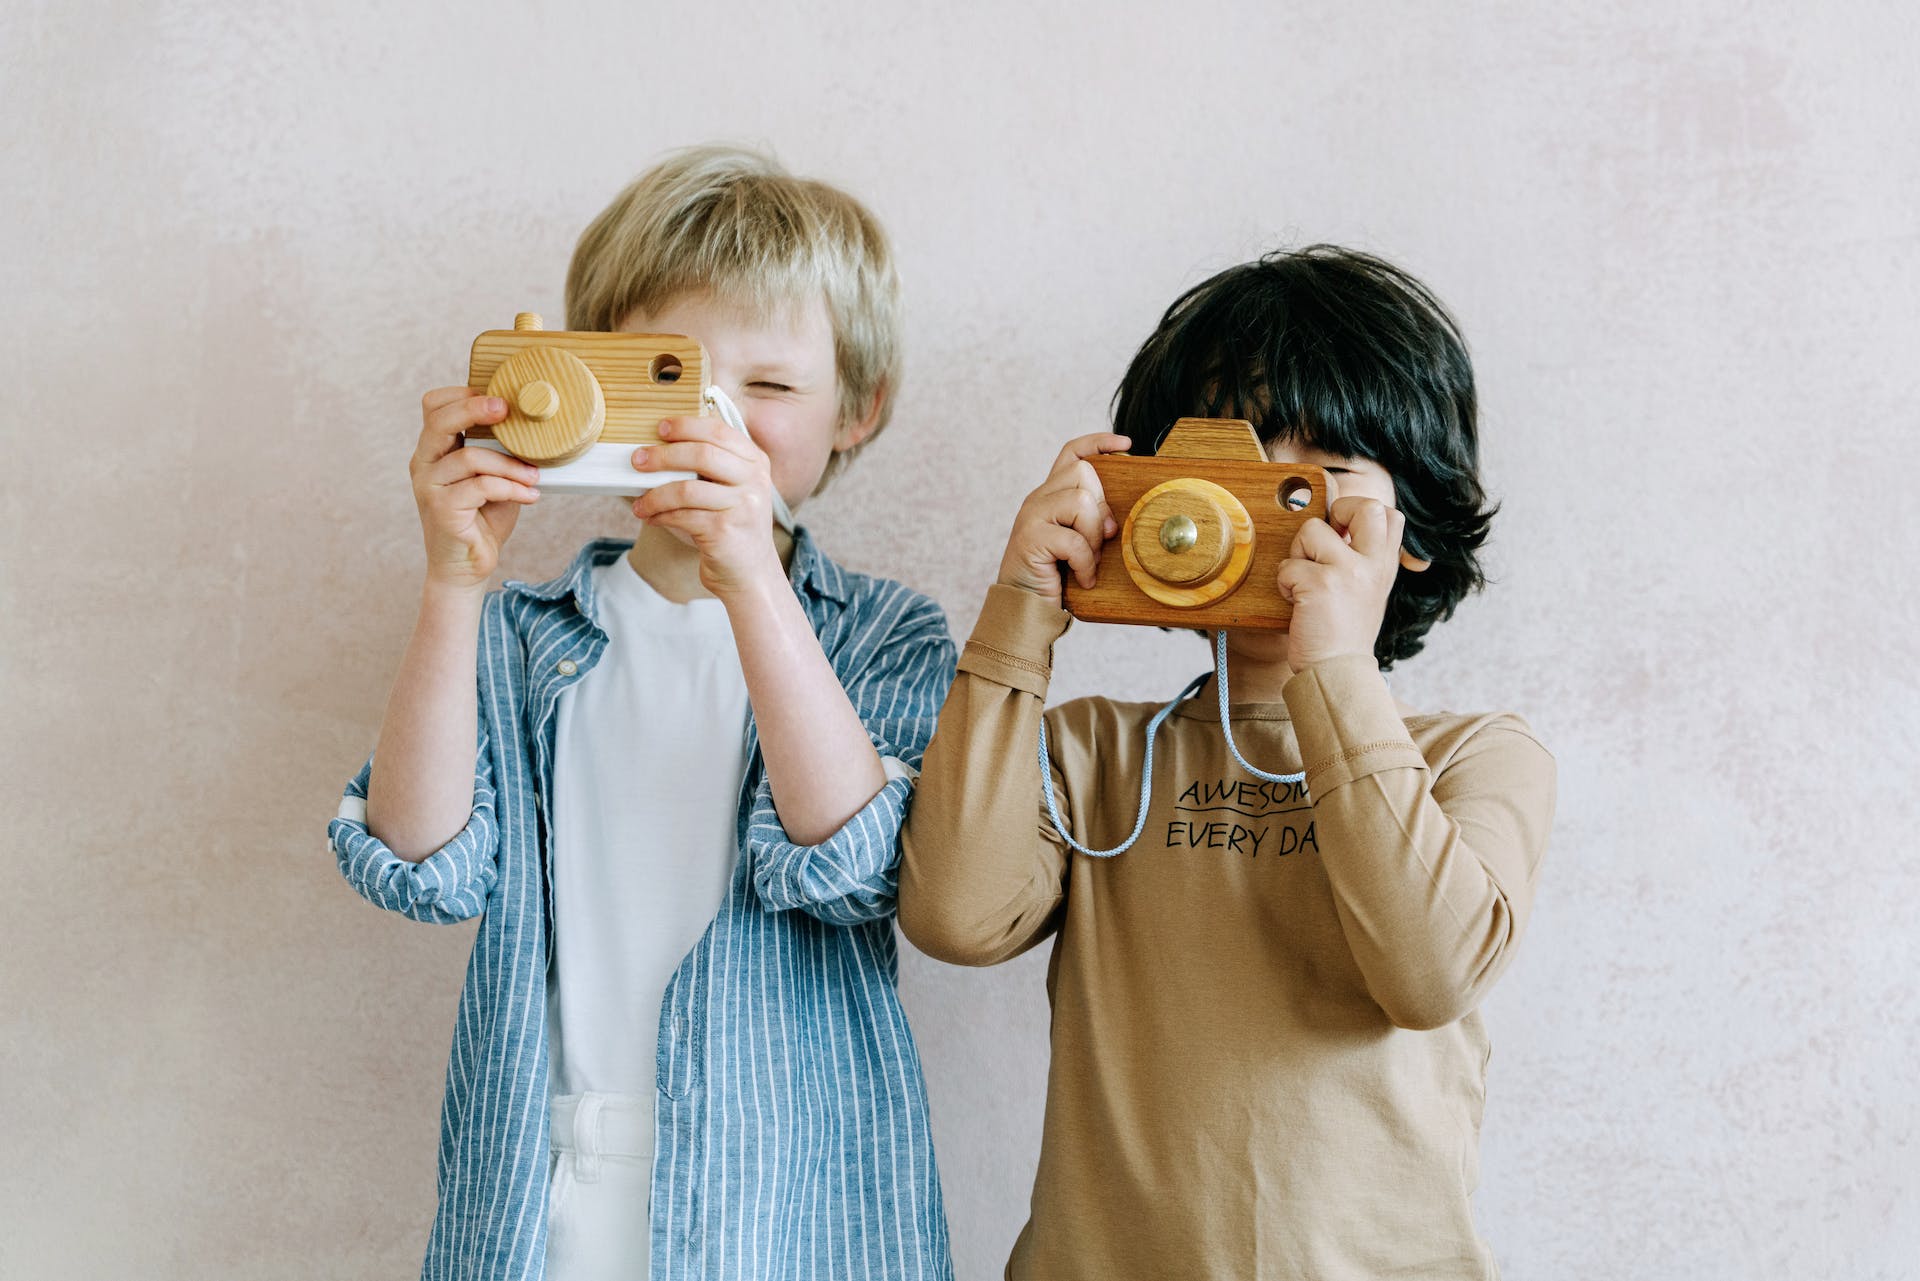 Two boys playing with toy camera | Source: Pexels